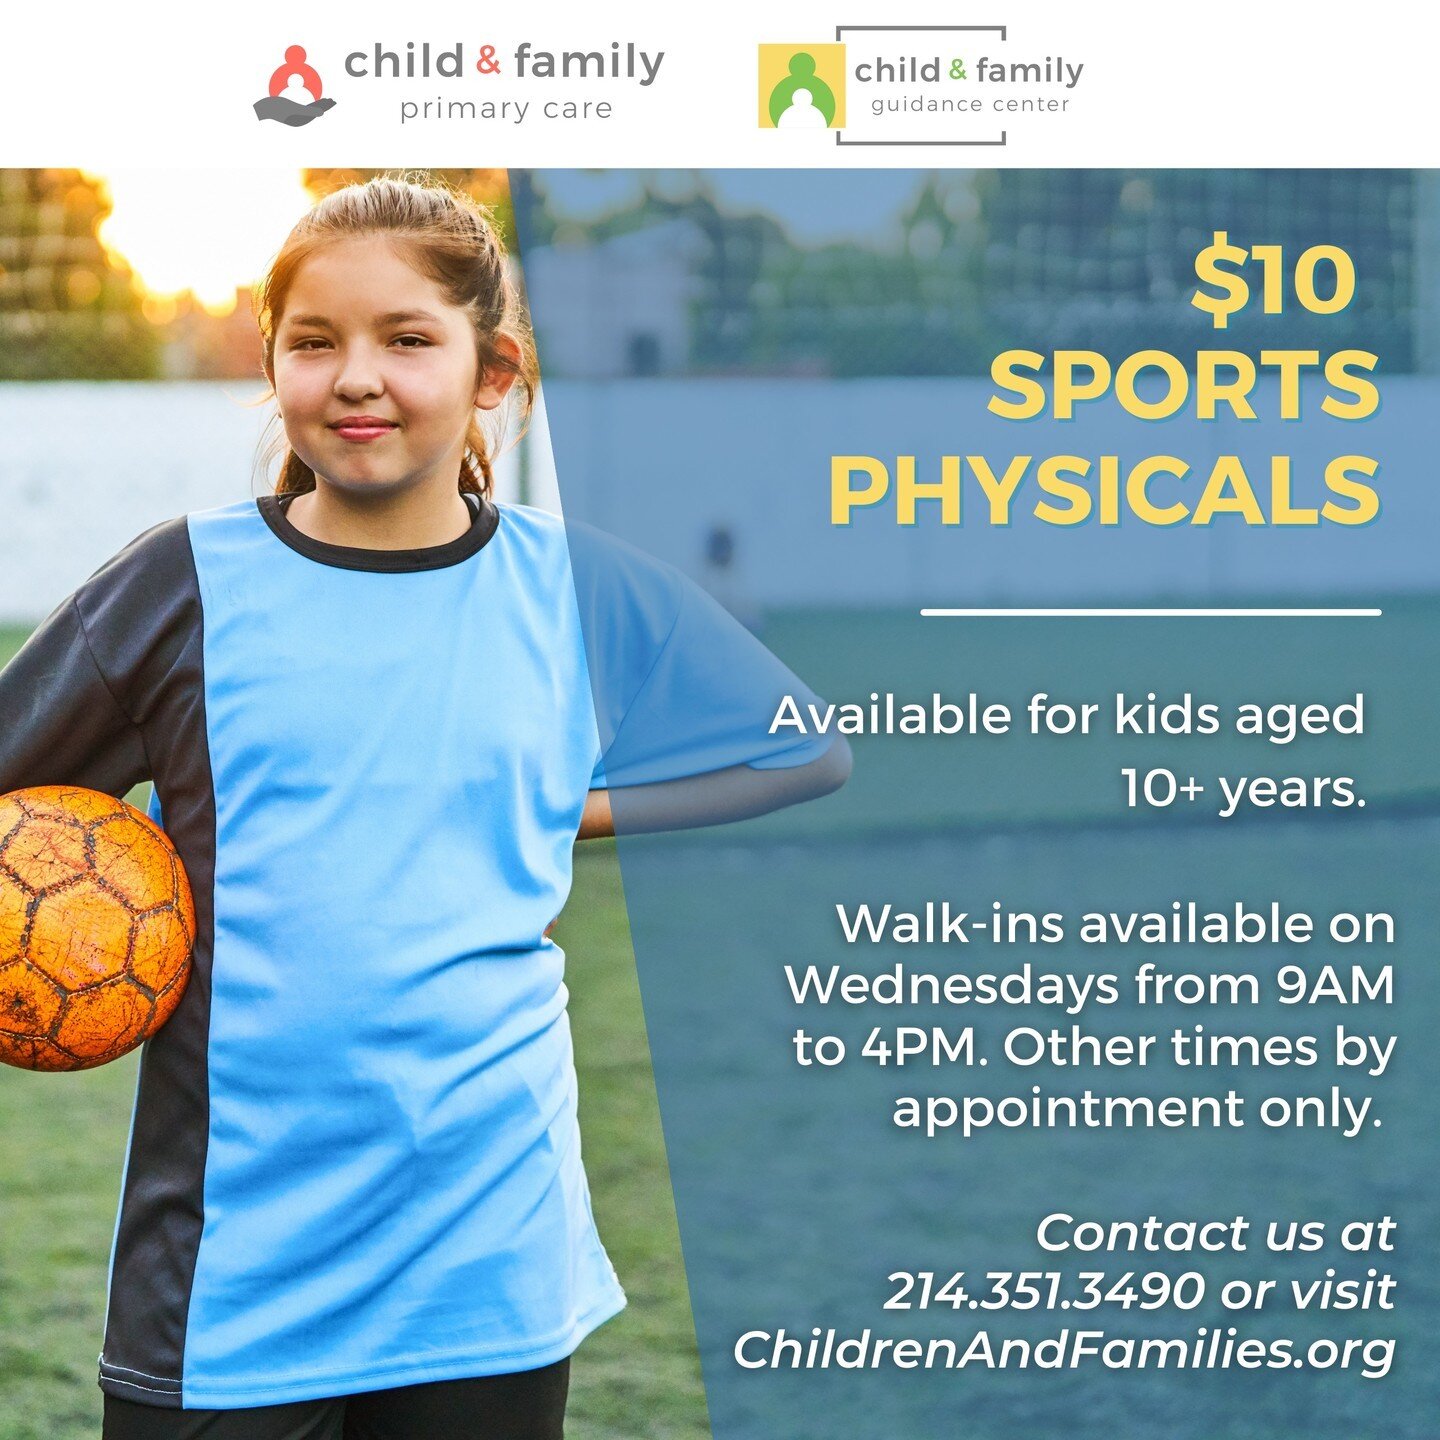 We are offering $10 sports physicals for our clients aged 10+ years! Walk-ins are available tomorrow and other times by appointment only. If you have any questions, please don't hesitate to contact us at 214.351.3490. 

#DallasMentalHealth #TexasMent